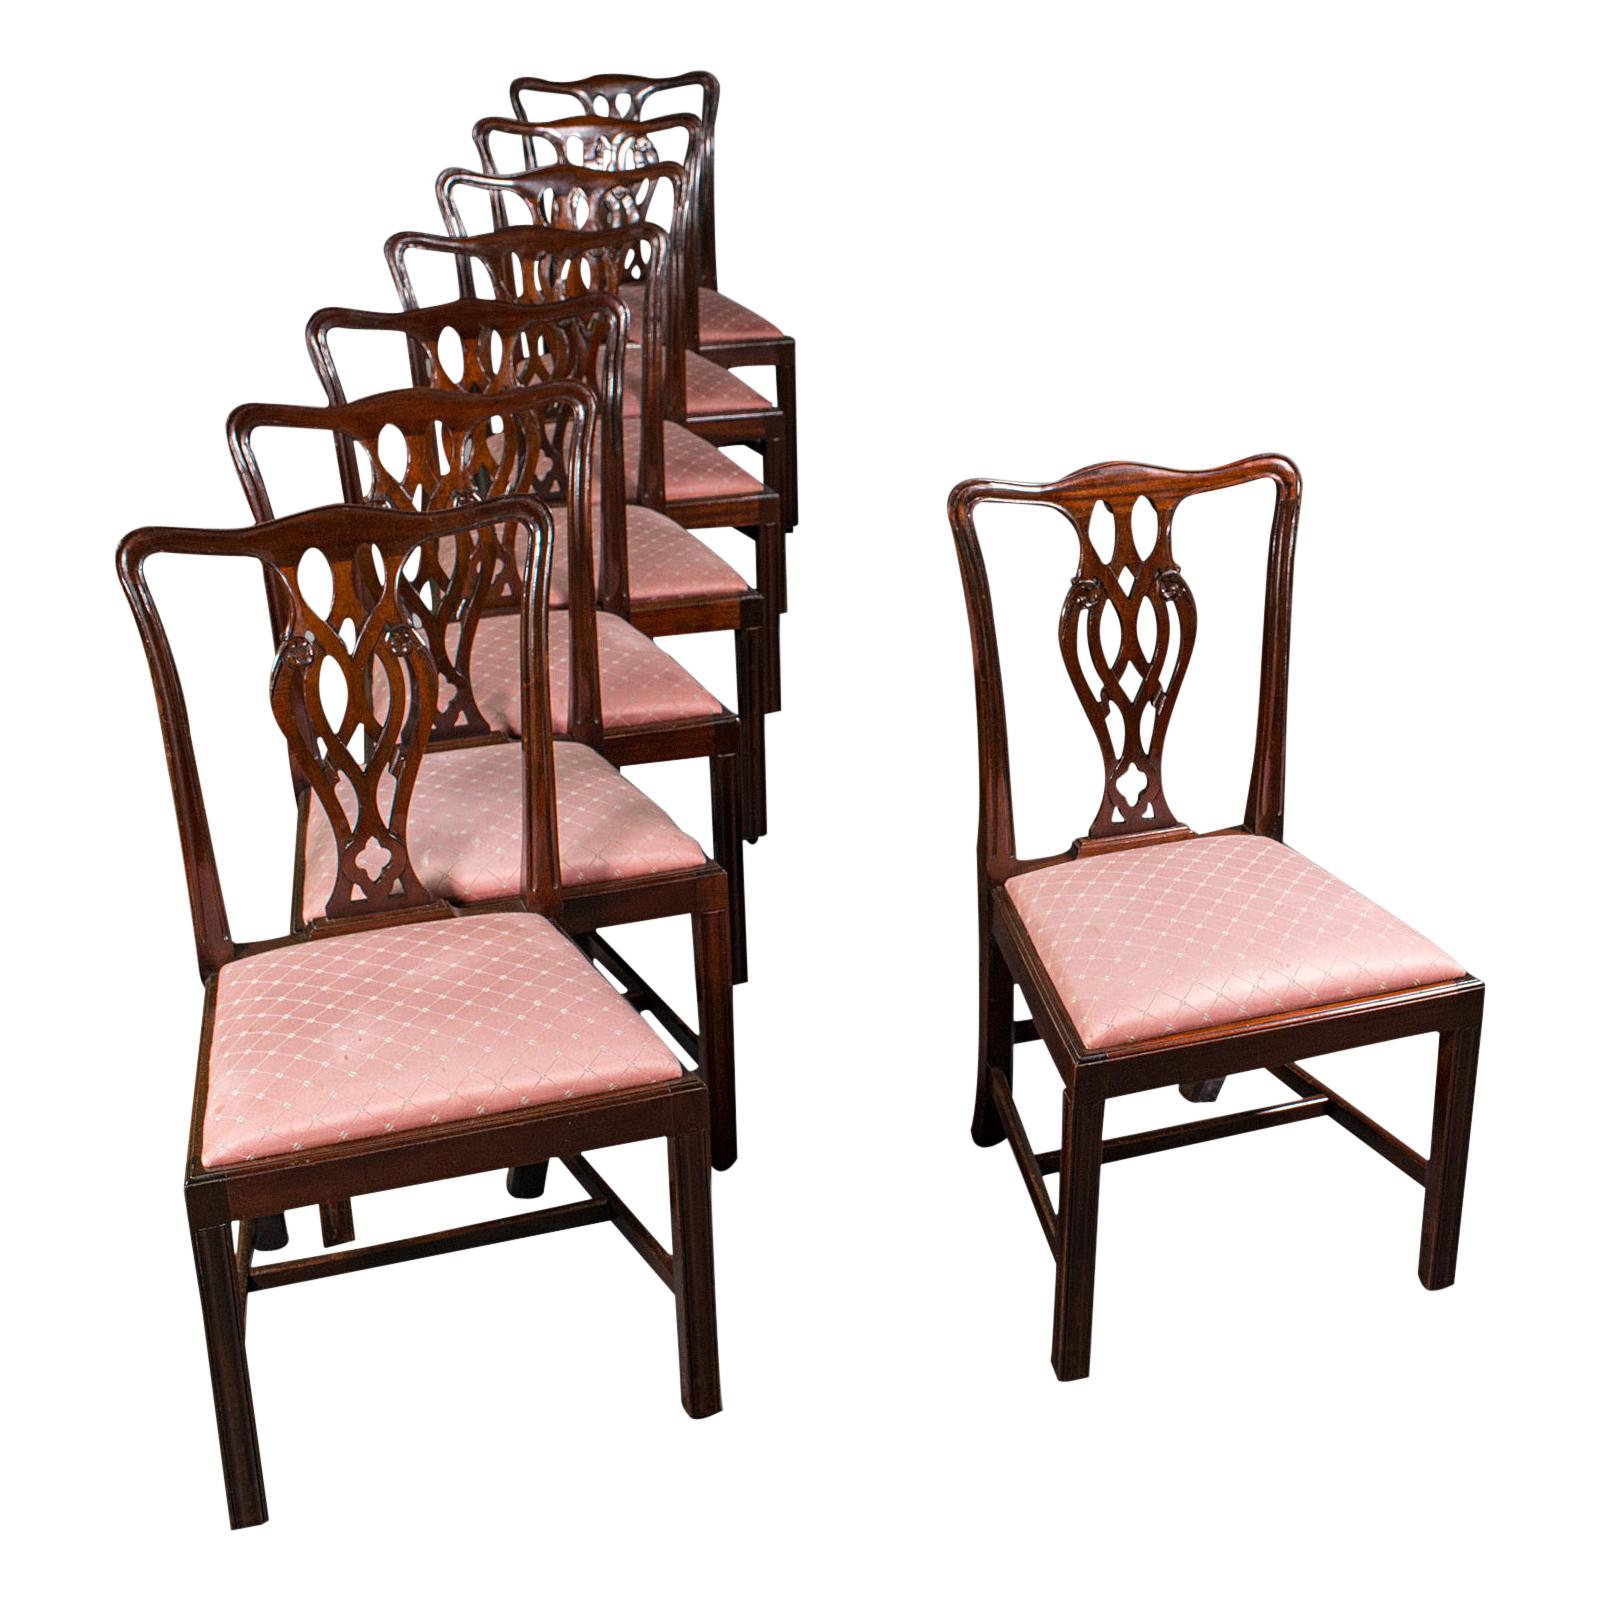 8 Antique Chippendale Revival Chairs, English, Mahogany, Dining Seat, Victorian